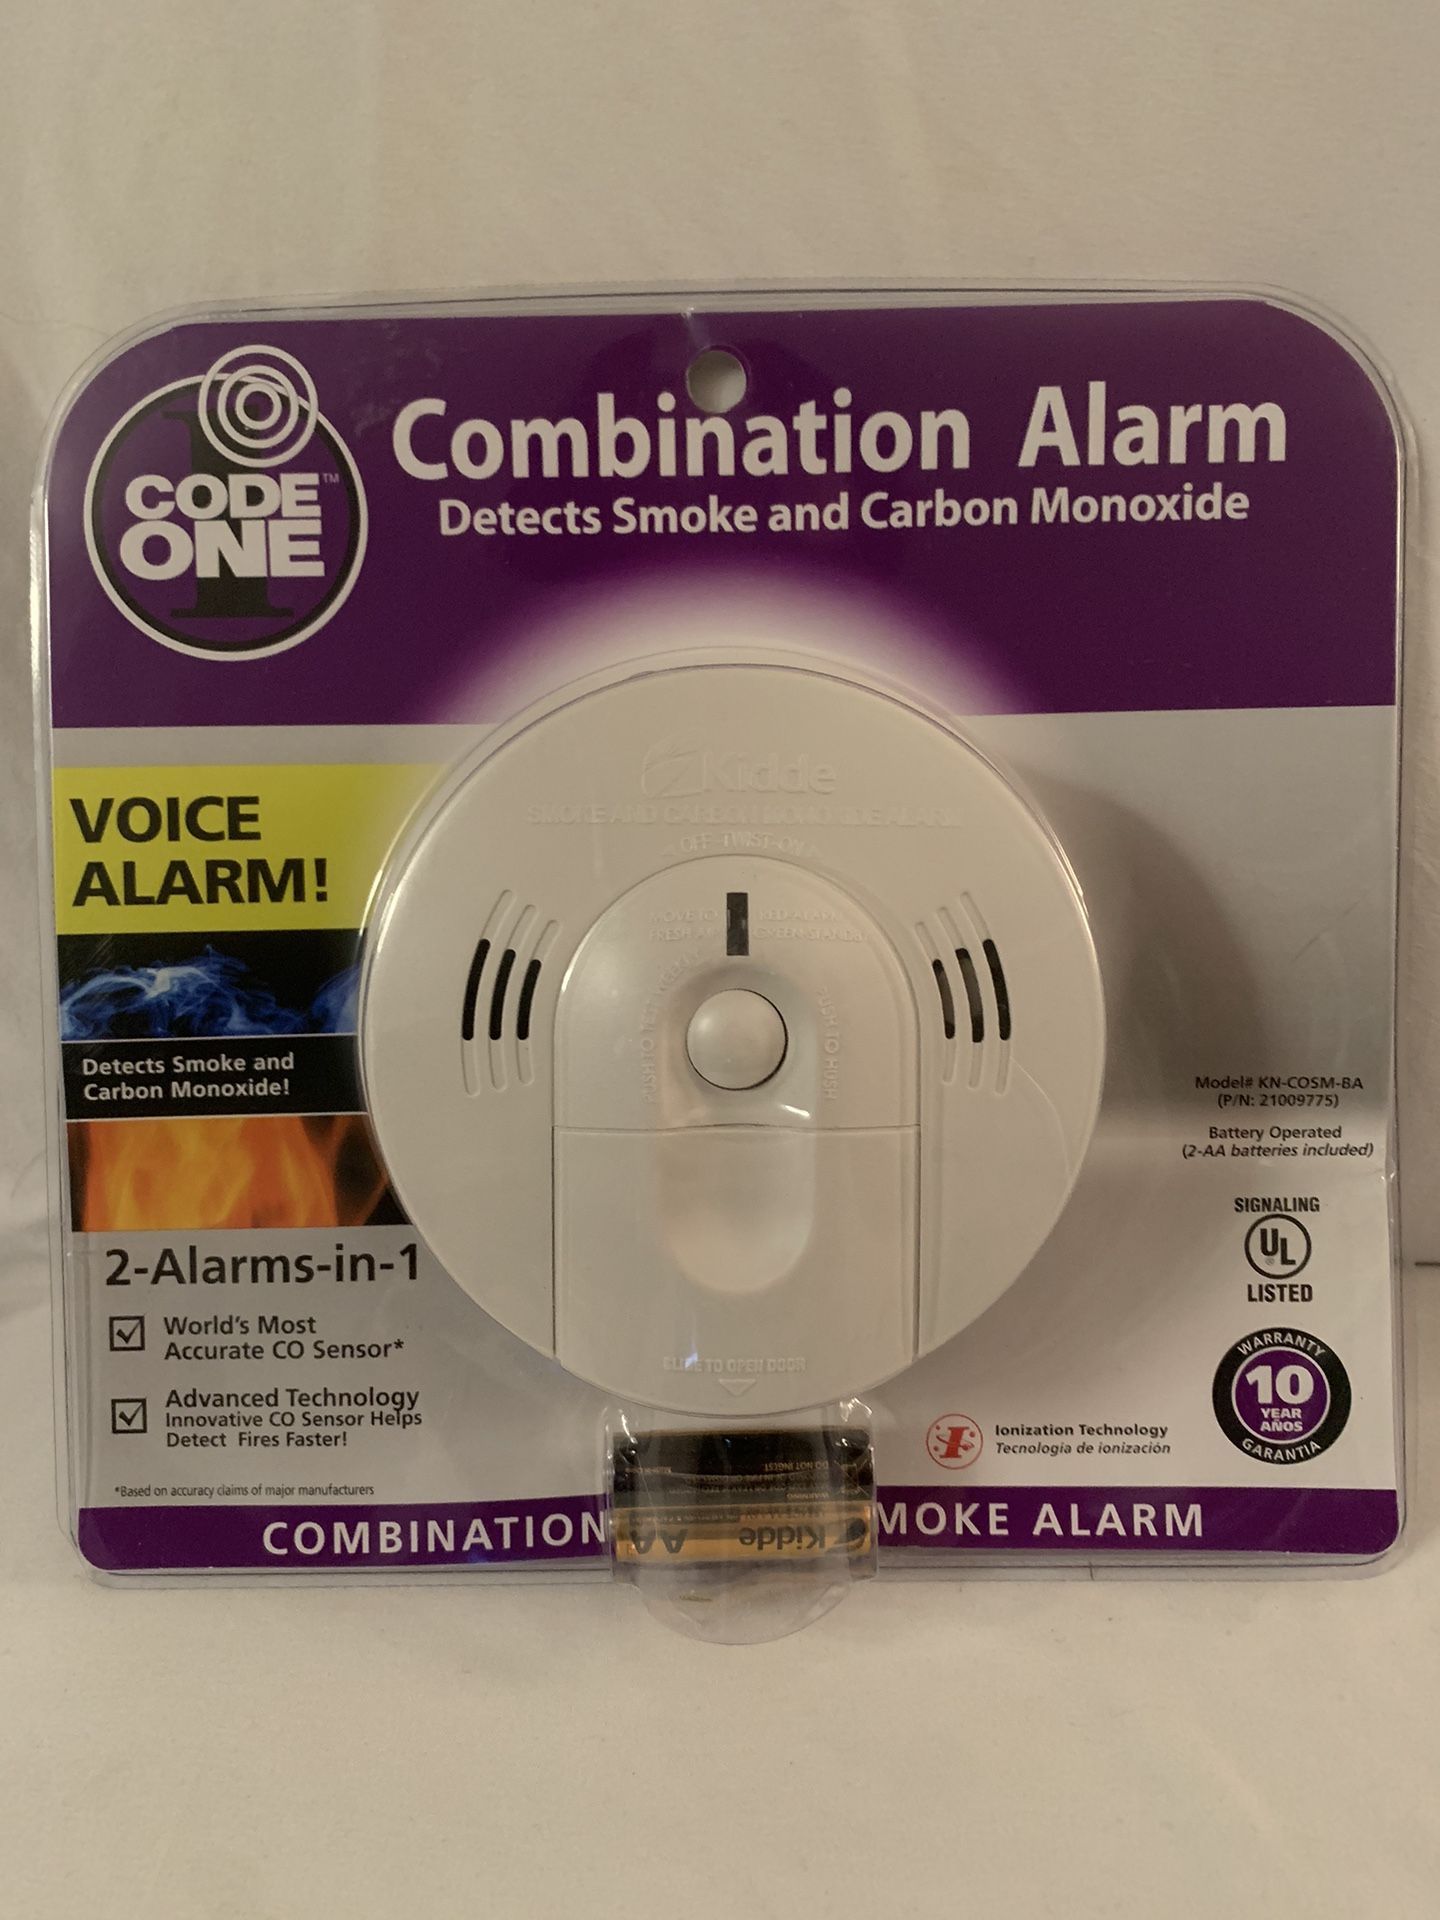 Kidde Code One Combination Voice Alarm. Detects Smoke And Carbon Monoxide.